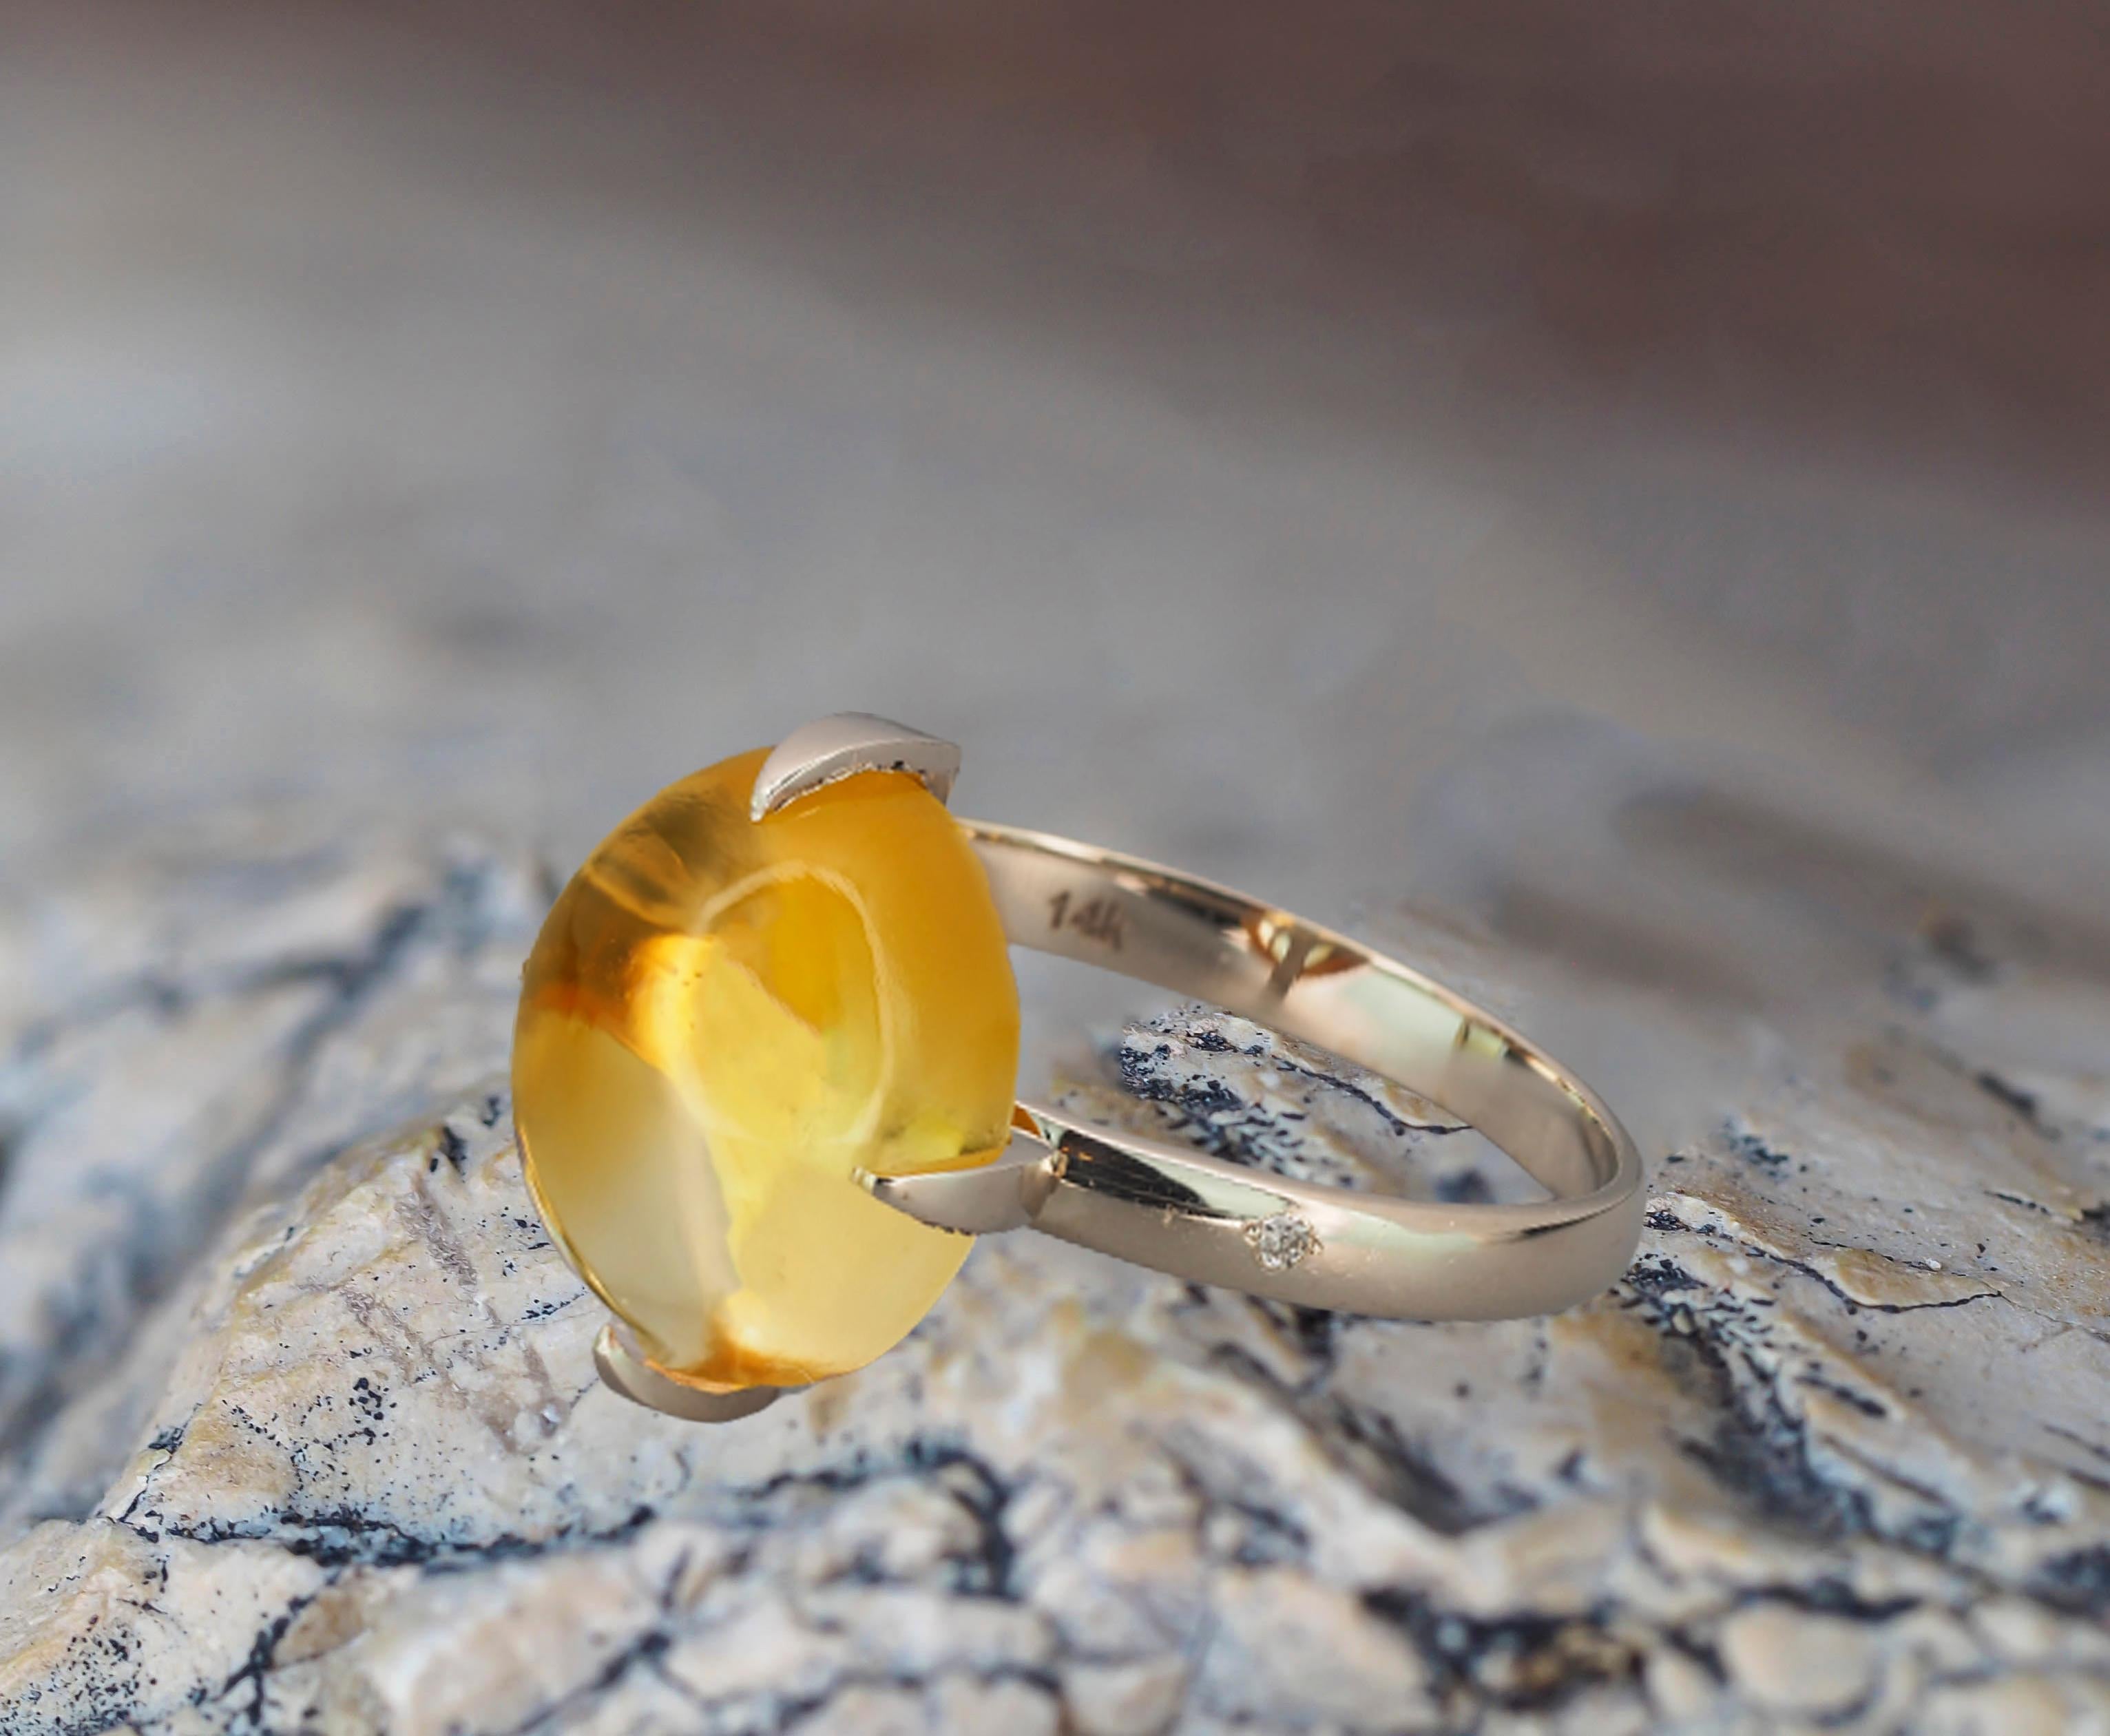 Citrine cabochon 14k gold ring. 
Citrine solitaire ring. Yellow citrine ring. November birthstone ring. Vintage citrine ring. Boho style ring.

Metal: 14k gold
Weight: 2.4 g. depends from size.

Set with citrine.
4.9ct. oval cabochon cut
Colour: